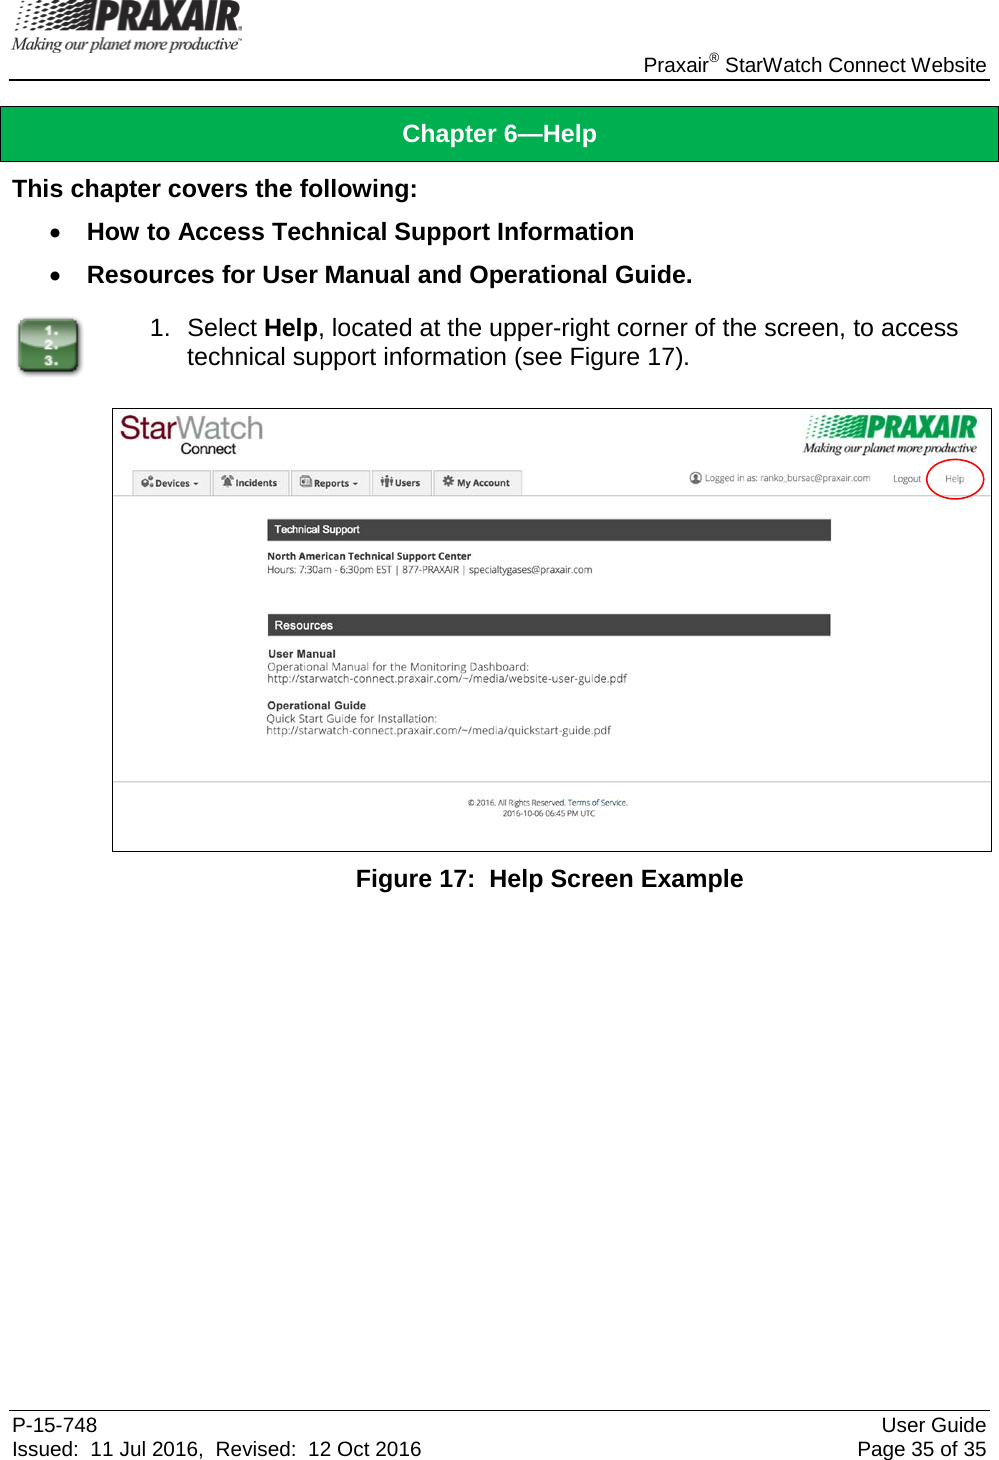    Praxair® StarWatch Connect Website P-15-748 User Guide Issued:  11 Jul 2016,  Revised:  12 Oct 2016 Page 35 of 35 Chapter 6—Help This chapter covers the following: • How to Access Technical Support Information • Resources for User Manual and Operational Guide.  1. Select Help, located at the upper-right corner of the screen, to access technical support information (see Figure 17).   Figure 17:  Help Screen Example   